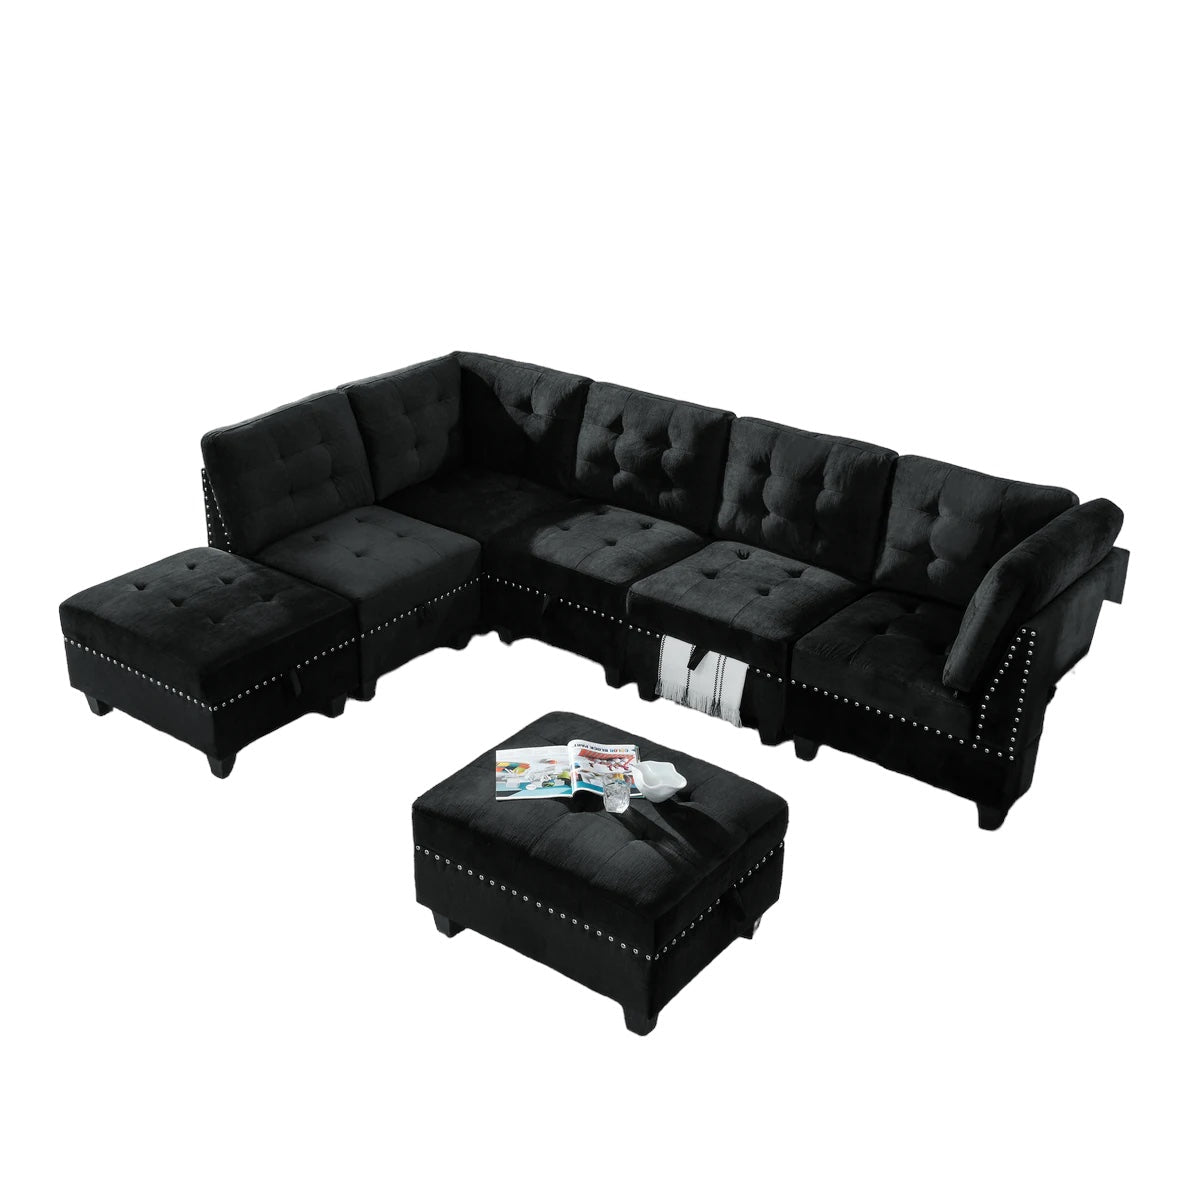 Black Velvet L-Shape Sectional Sofa with Ottomans - DIY Modular Sofa-Stationary Sectionals-American Furniture Outlet